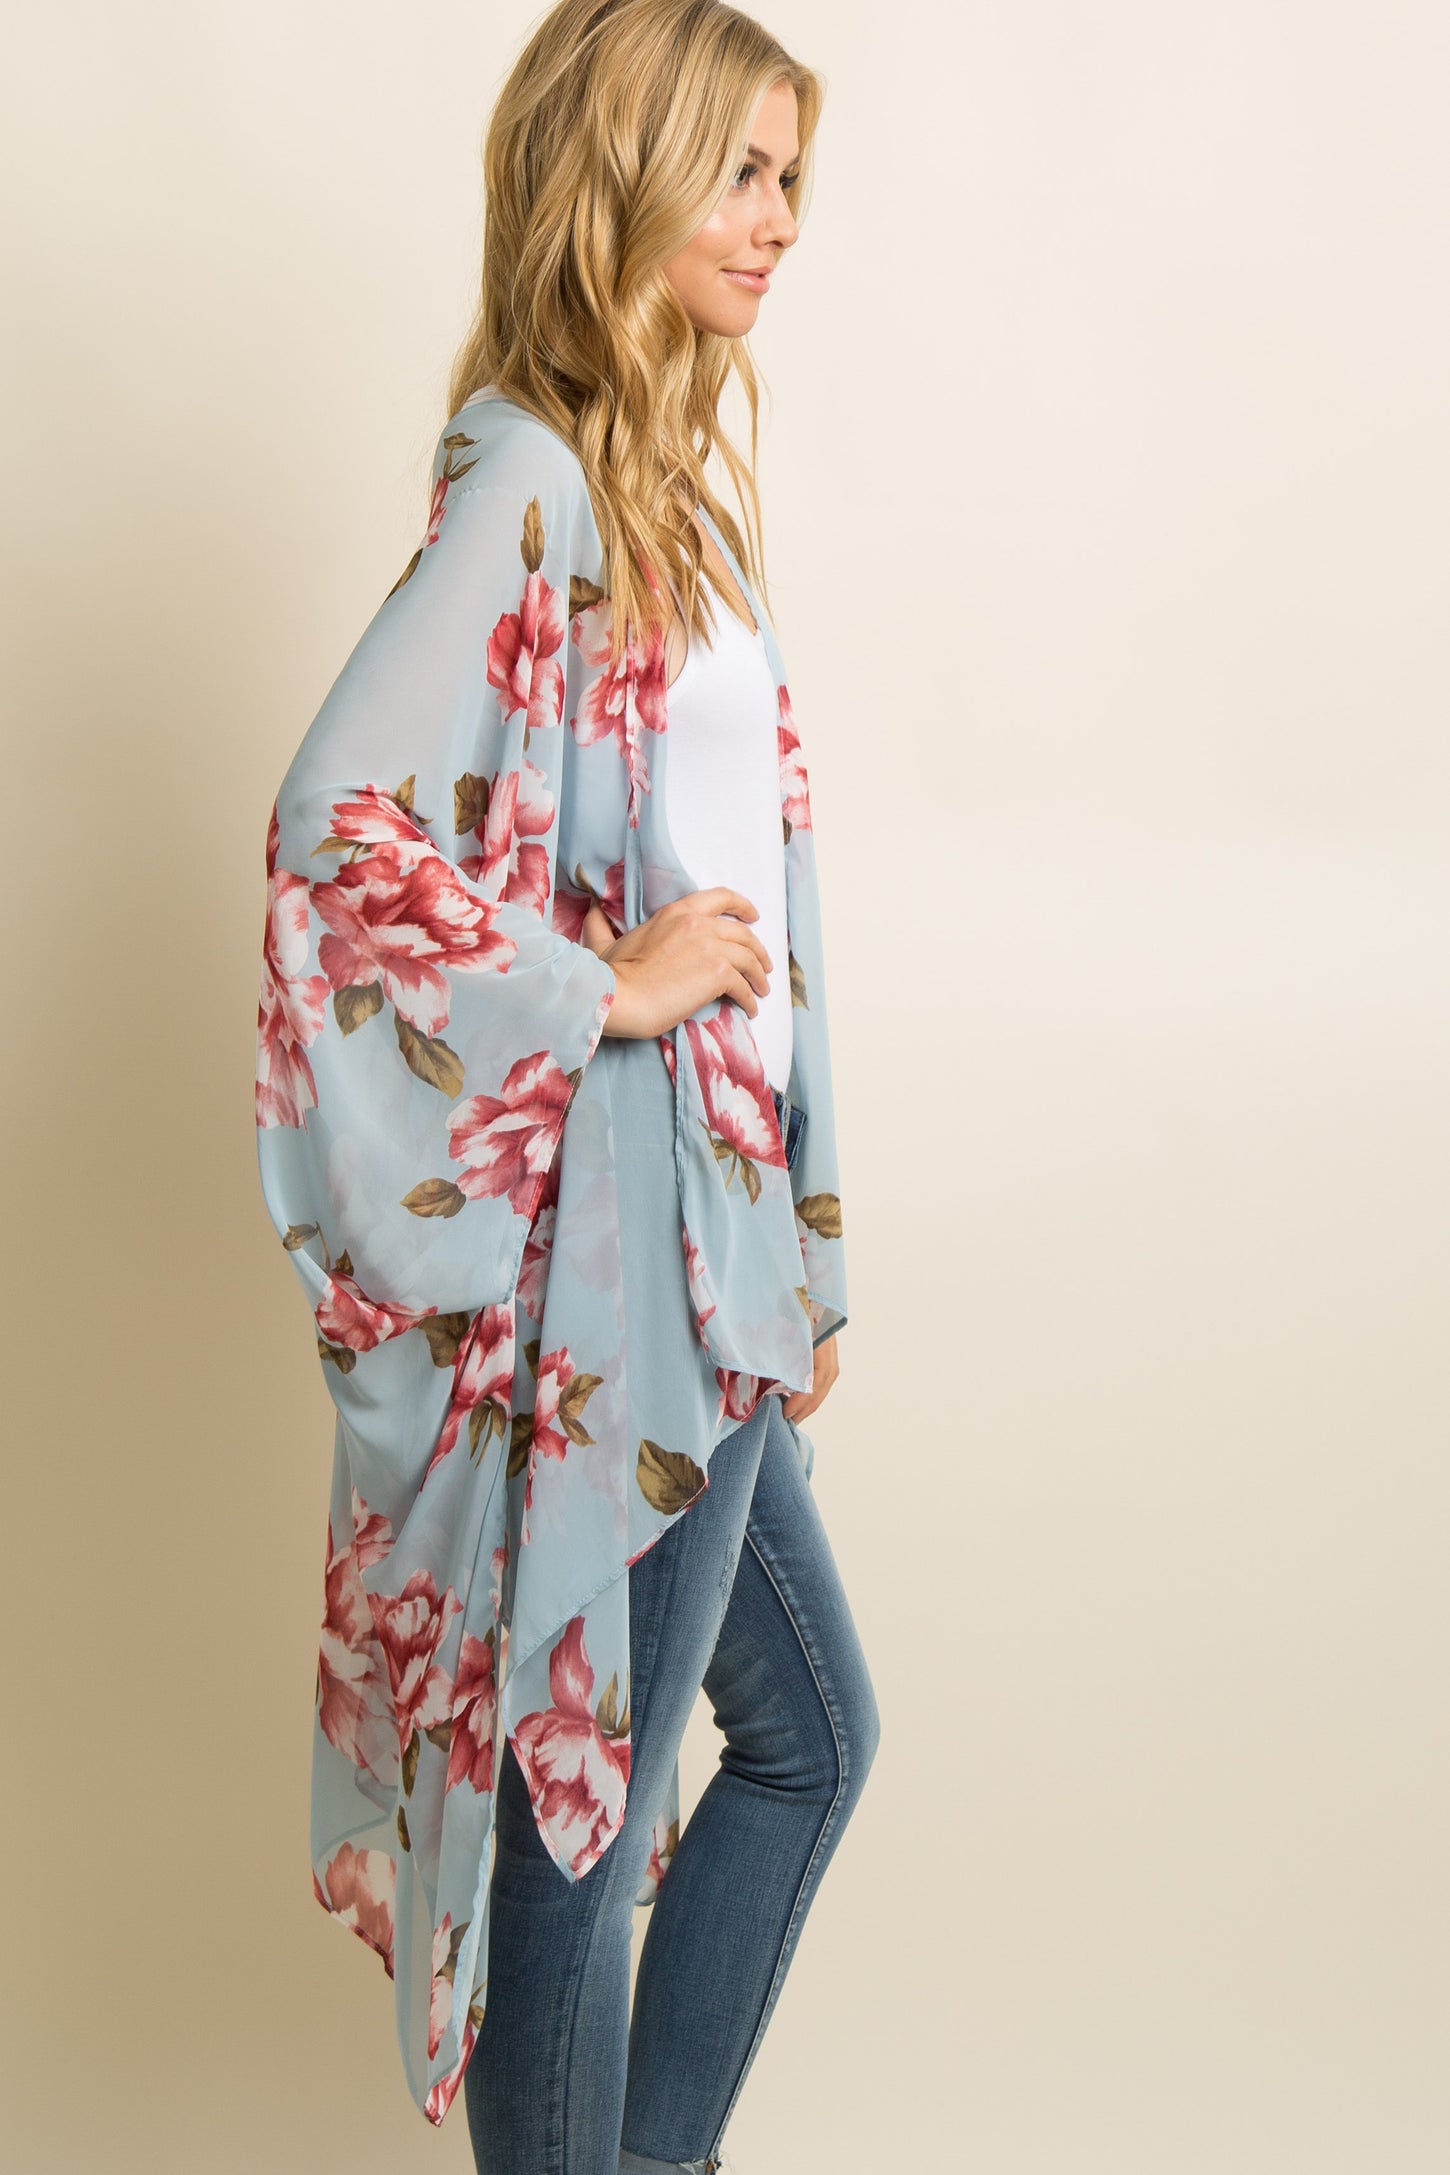 Light Blue Floral Chiffon Draped Cover Up